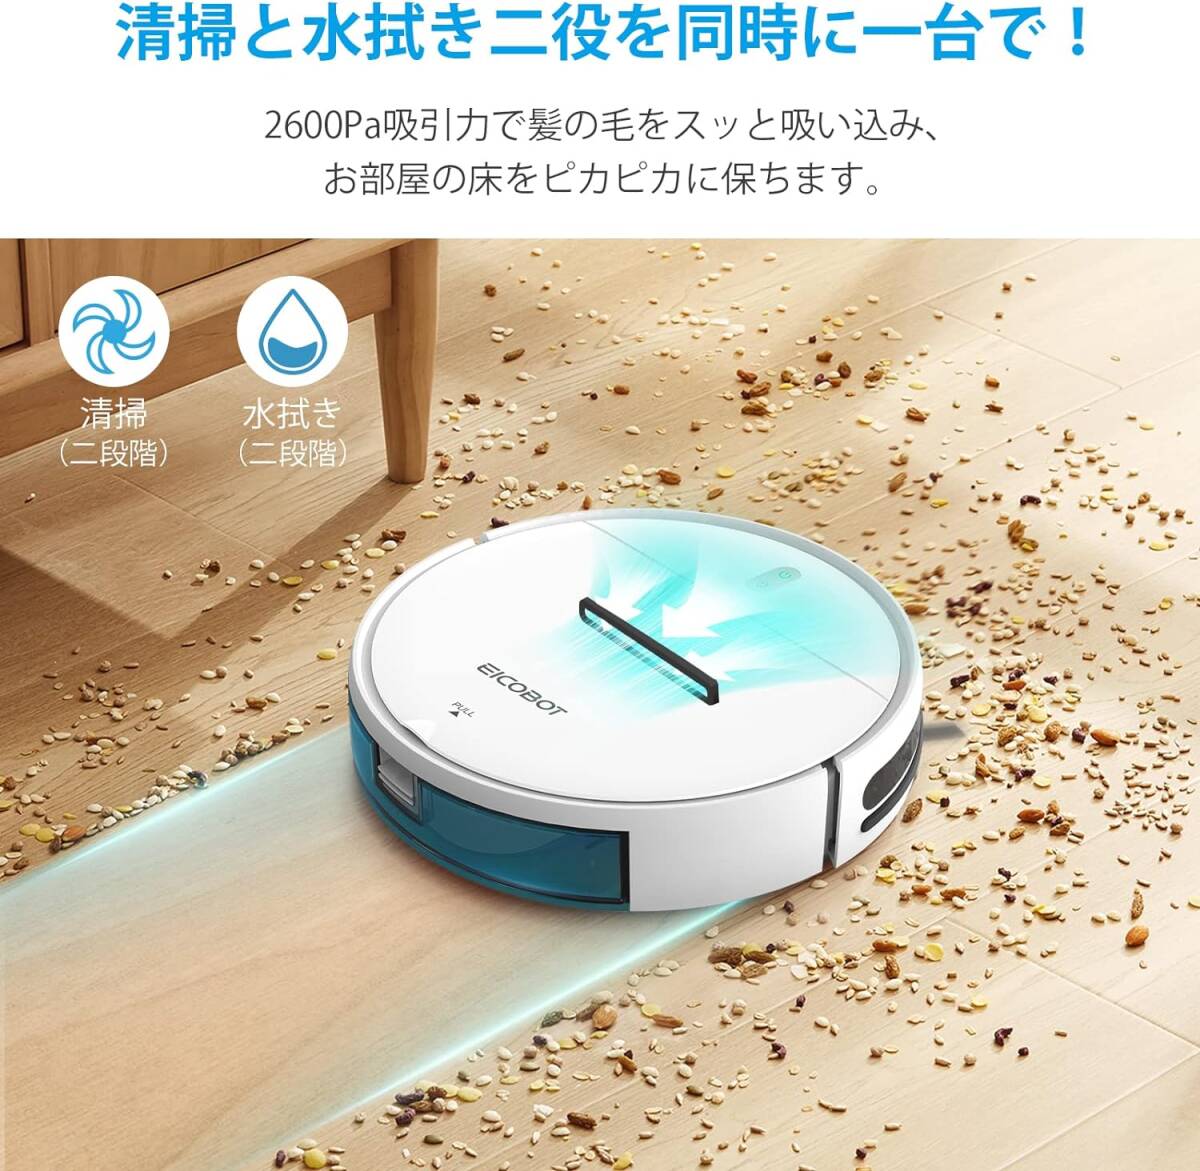  new goods unused * free shipping EICOBOT robot vacuum cleaner water .. both for 2600Pa thin type 110 minute automatic charge reservation cleaning falling prevention remote control Japanese manual attaching 